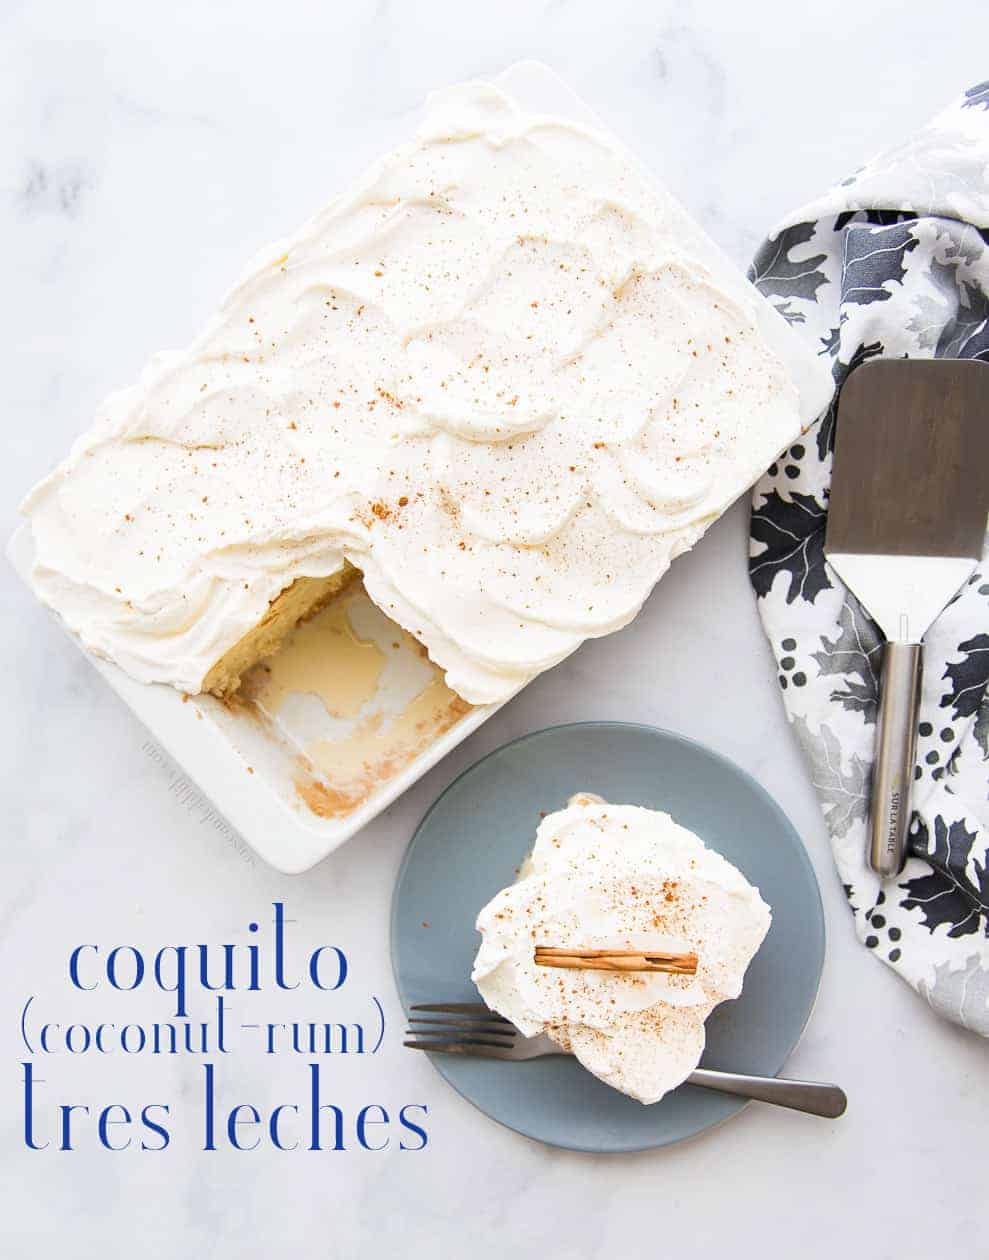 Make the holiday merrier and brighter by serving this creamy, fluffy Coquito Tres Leches cake for dessert. Combine the beloved Puerto Rican coconut and rum nog with an airy sponge cake. Top with freshly whipped cream and a dusting of cinnamon. #coquito #coquitotresleches #treslechescake #cake #bizcochodetresleches #postrespuertorriqueños #recetasdepostres #treslechesrecipe #coconut #rum #whippedcream #Christmasdessert #Thanksgivingdessert #holidaybaking #holidaydesserts via @ediblesense